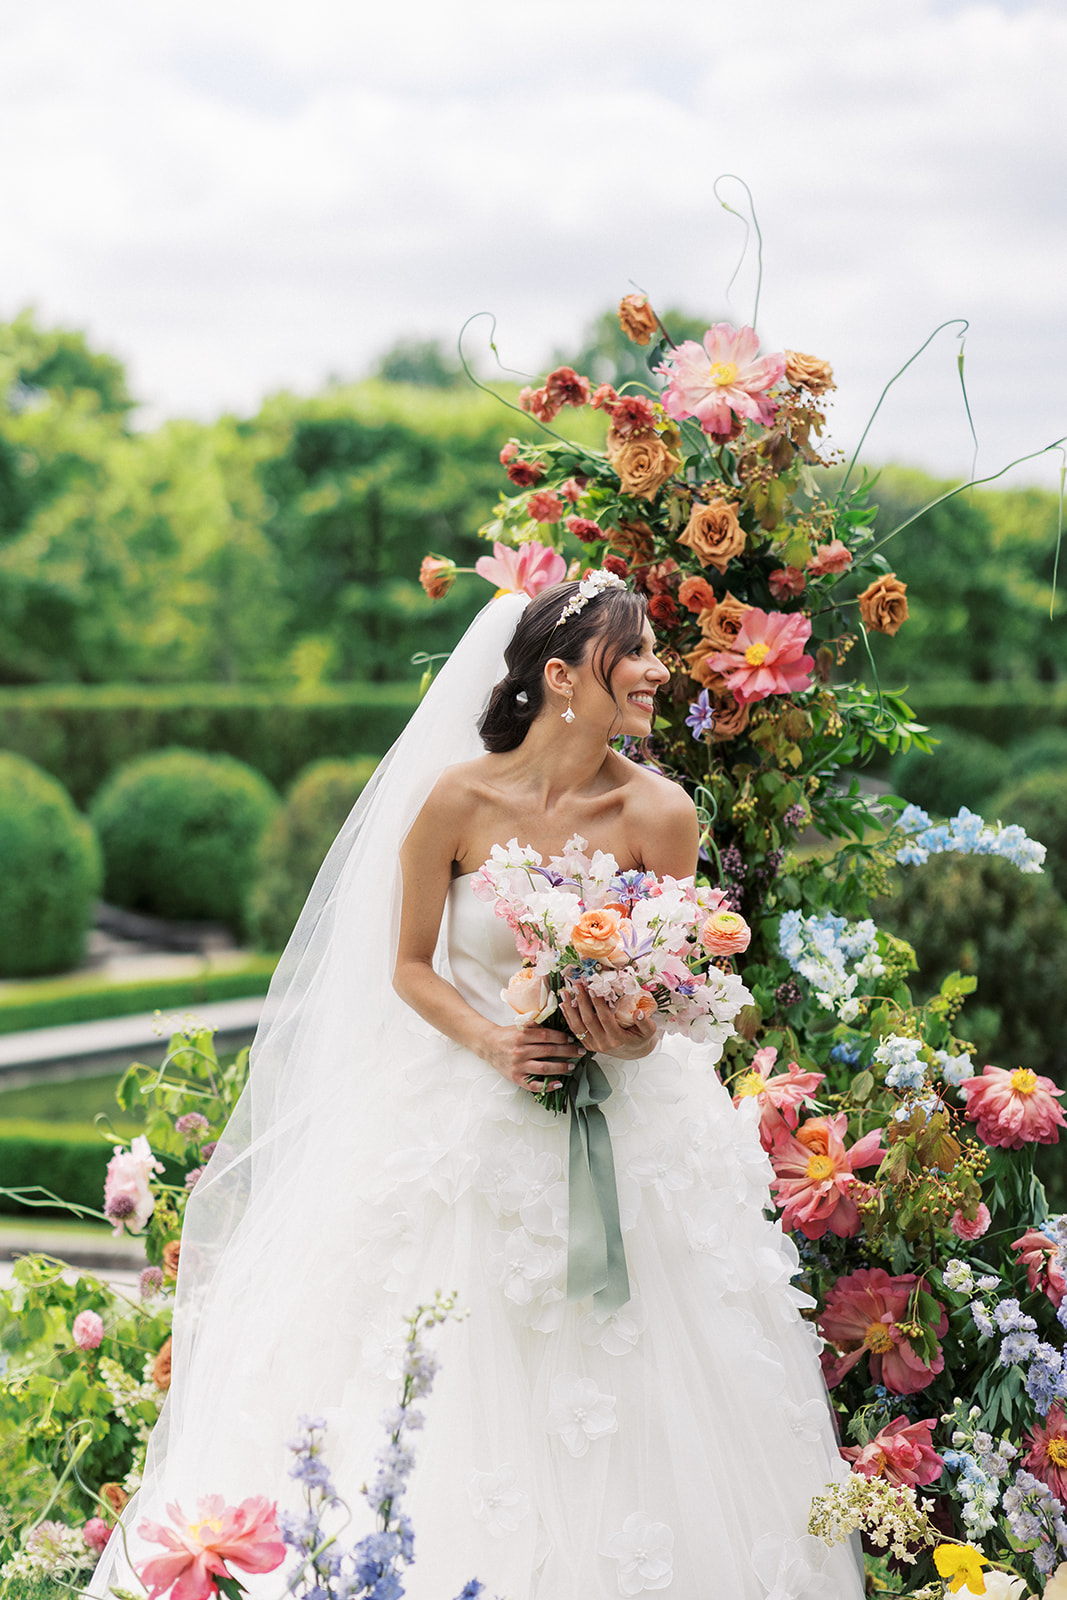 A bride smiles over her shoulder while standing amongst a large flower display in a garden